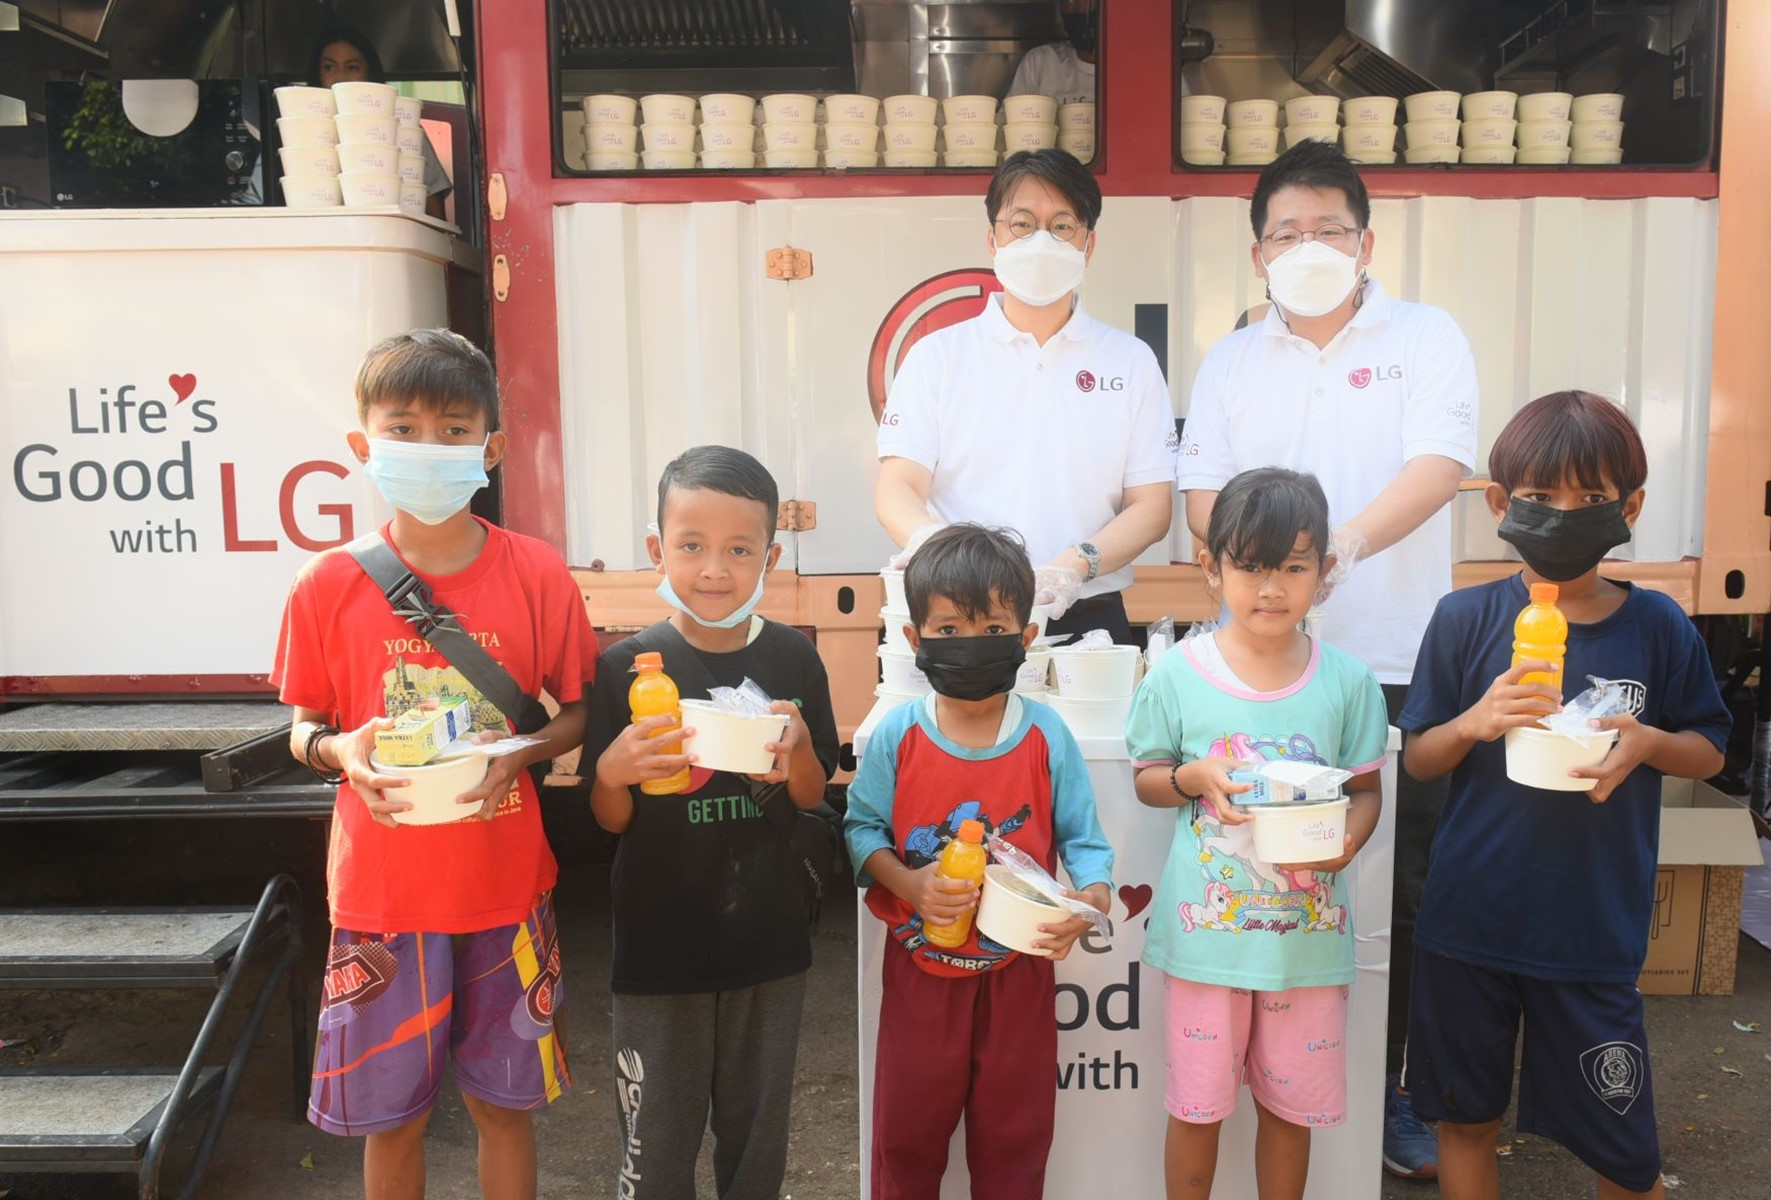 Lee Taijin, President of LG Electronics Indonesia, and Kris Lee, Product Marketing Director of Home Appliances LG Electronics Indonesia, serve food to children in Jakarta